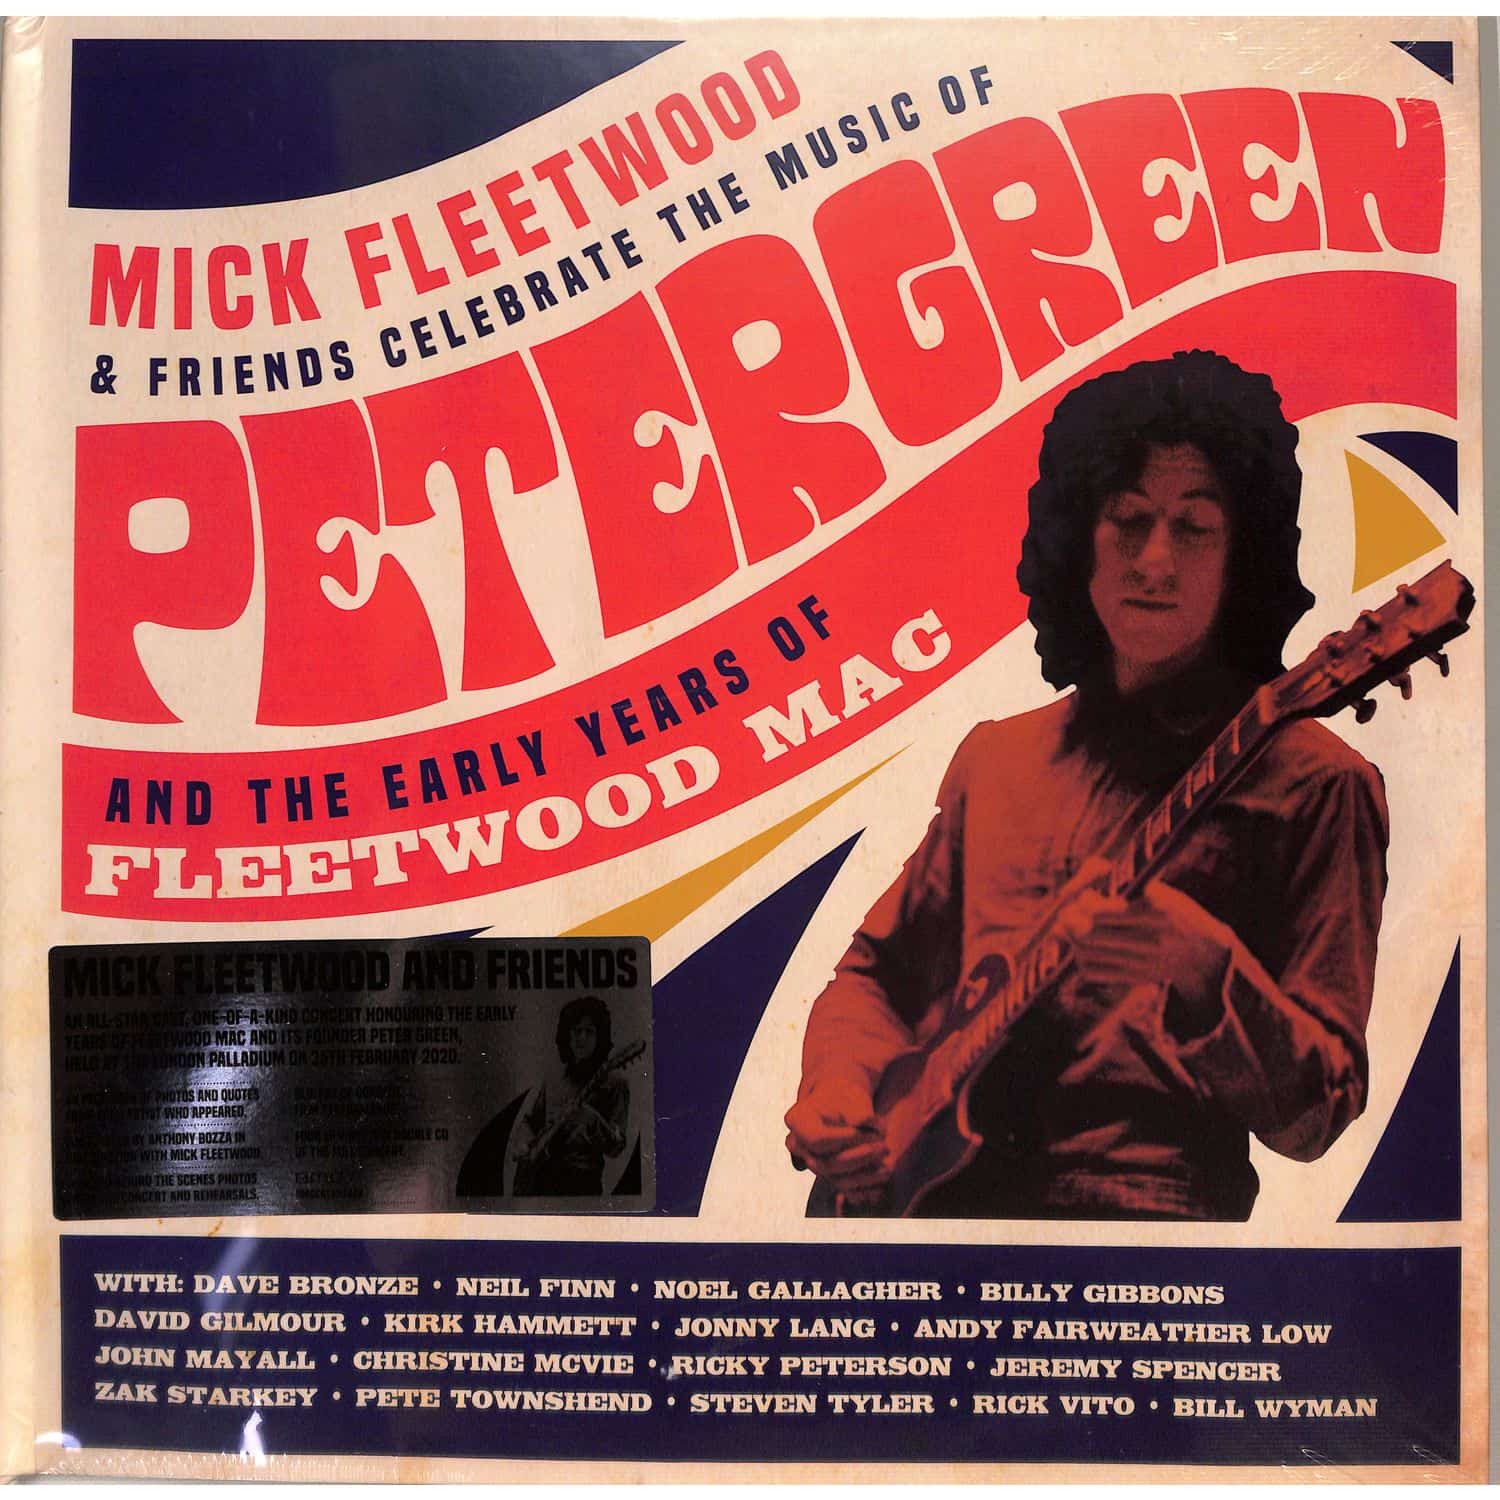 Mick and Friends Fleetwood - CELEBRATE THE MUSIC OF PETER GREEN AND THE EARLY Y 